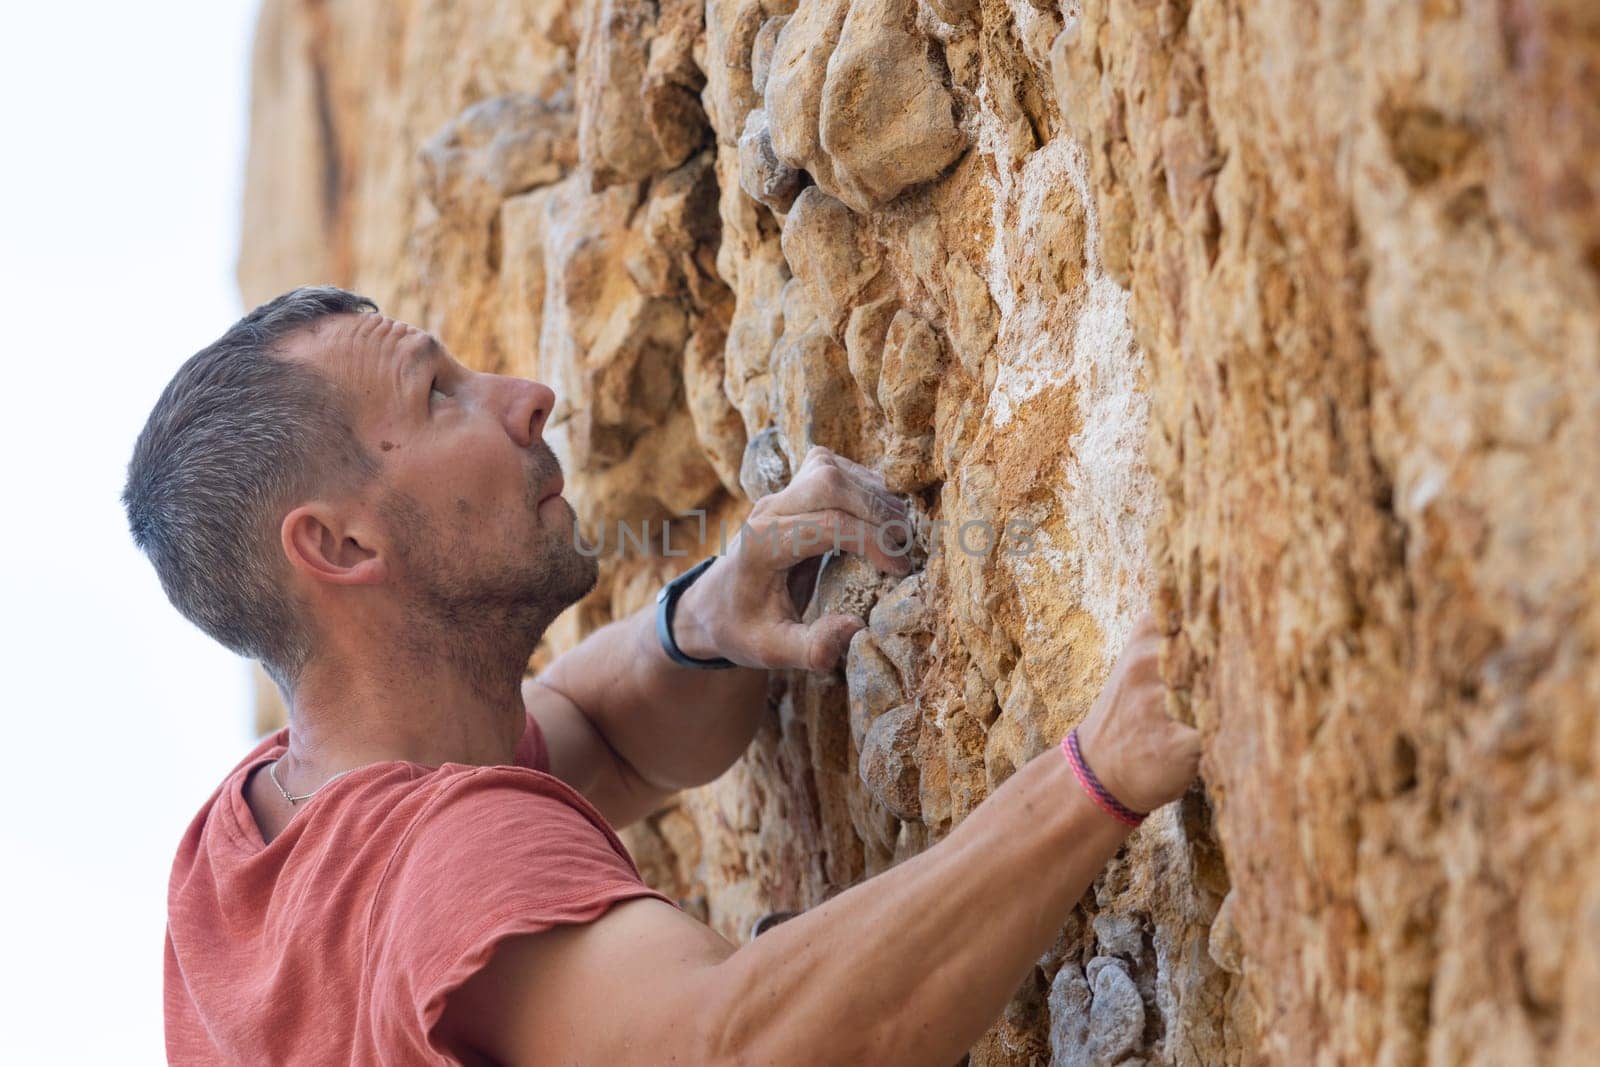 A man in a red shirt is climbing a rock wall. He is wearing a black wristband and a red bandana